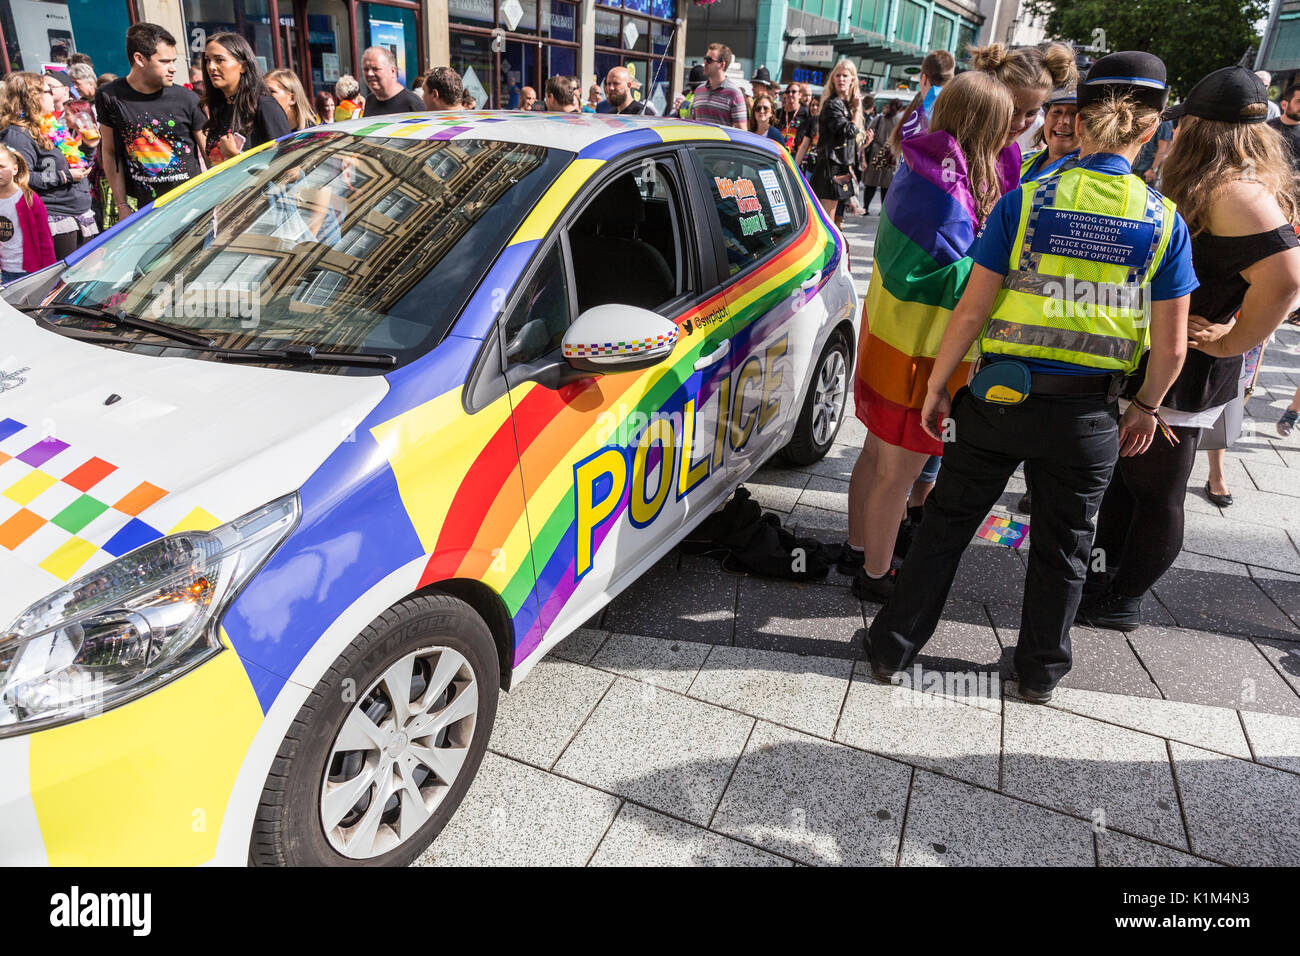 A police car decorated with rainbows supports the Pride Parade in Cardiff, Wales 2017 Stock Photo